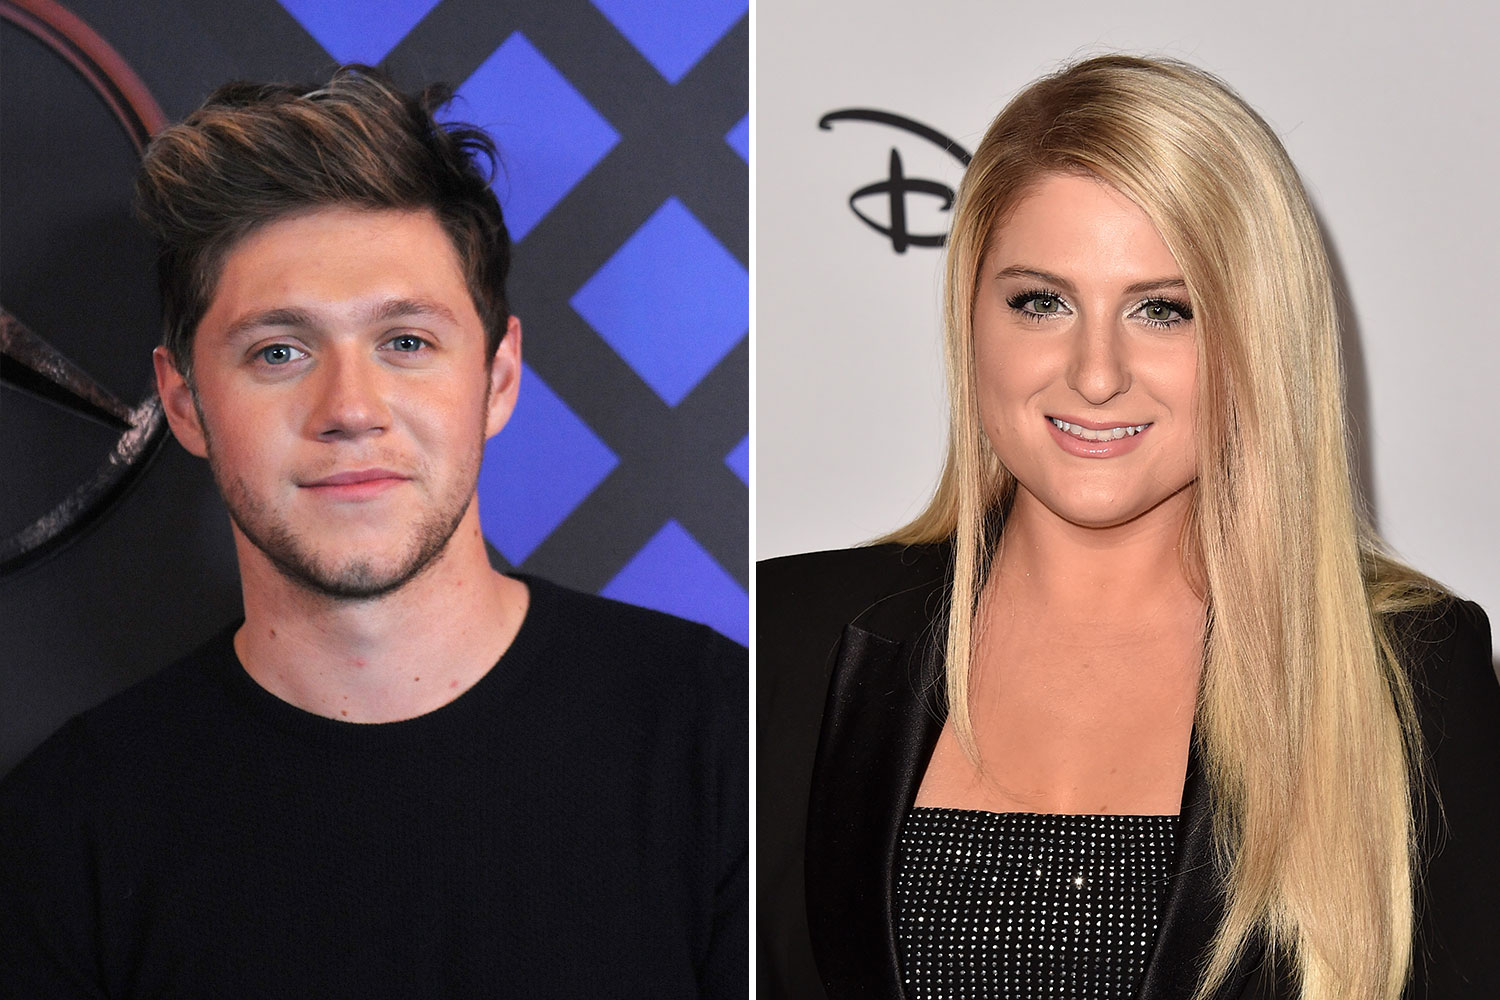 Meghan Trainor is angry with Niall Horan for using the same song title